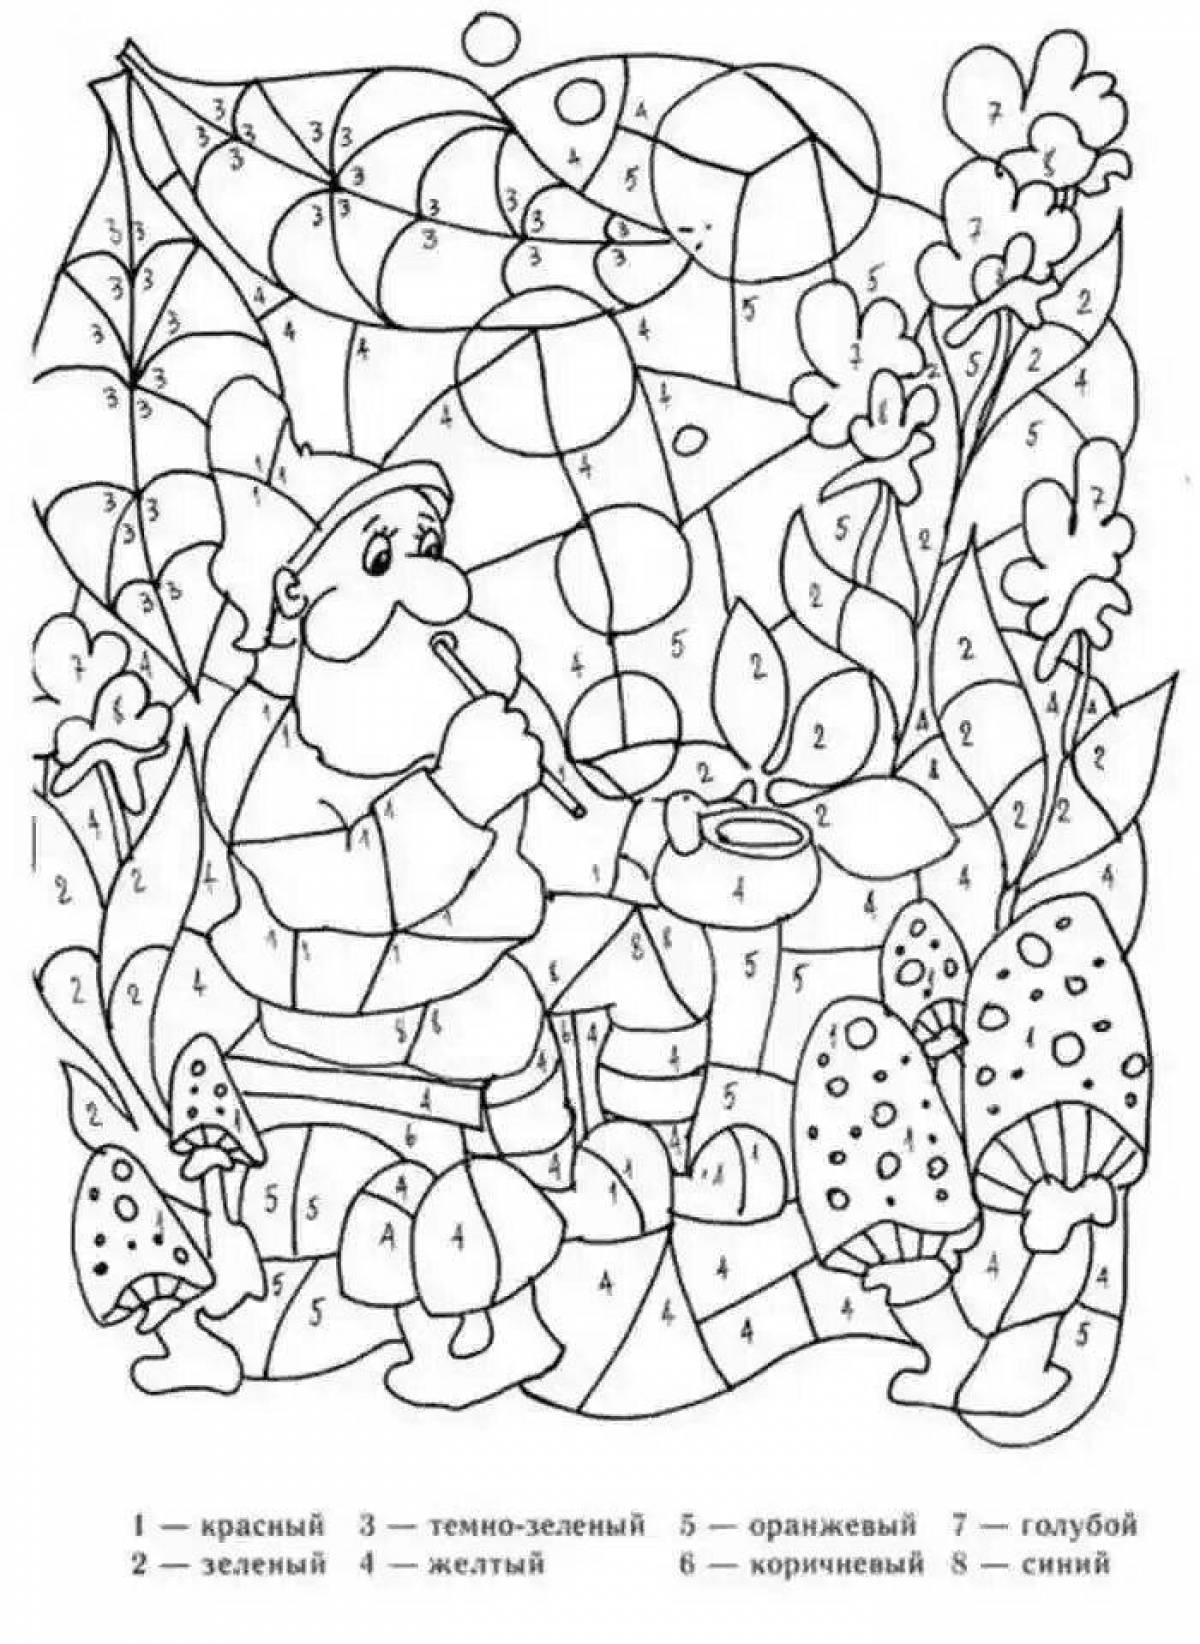 Bright number coloring page